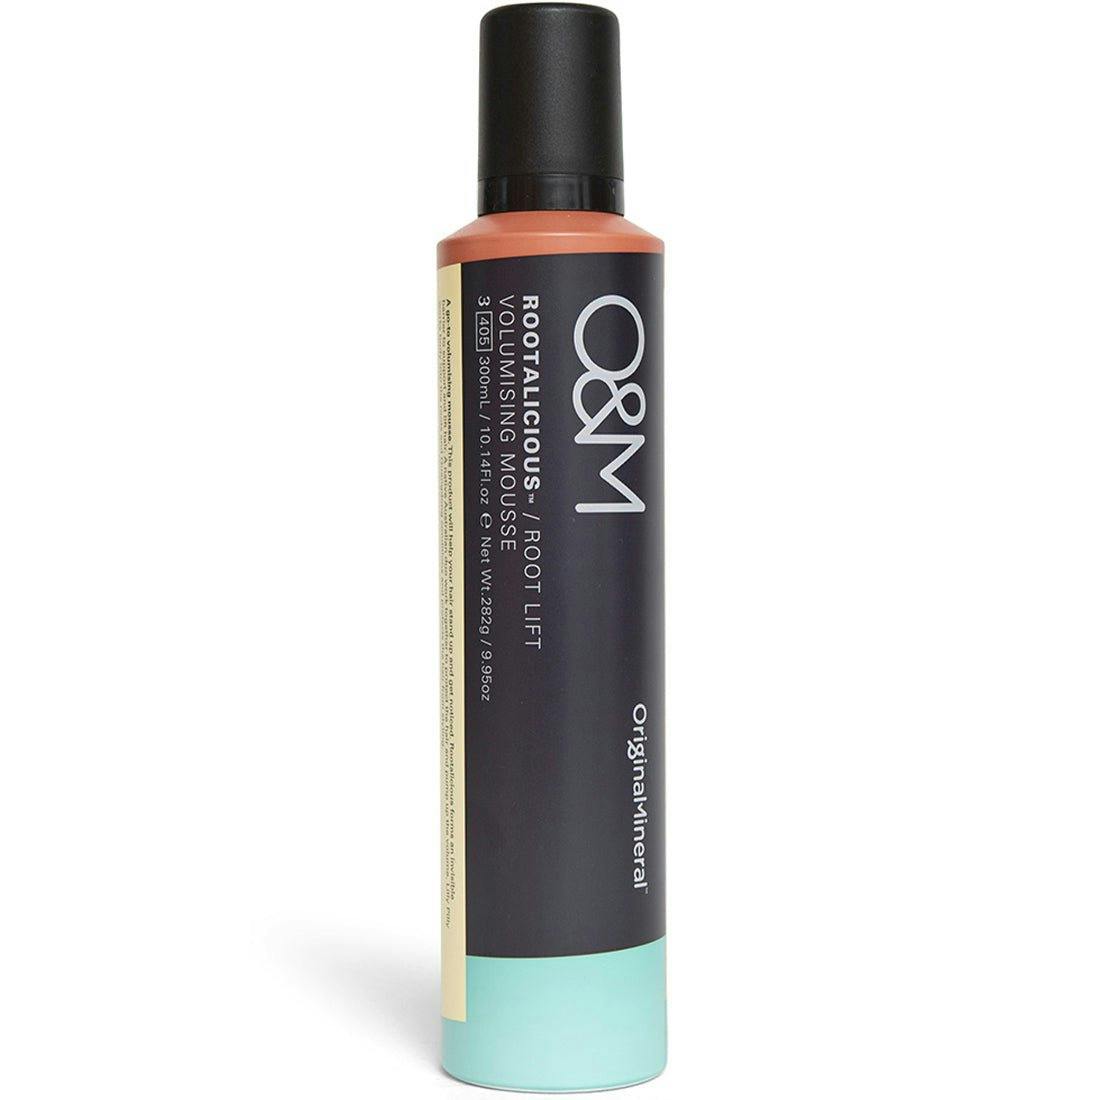 O&M Rootalicious Root Lift Mousse 300ml